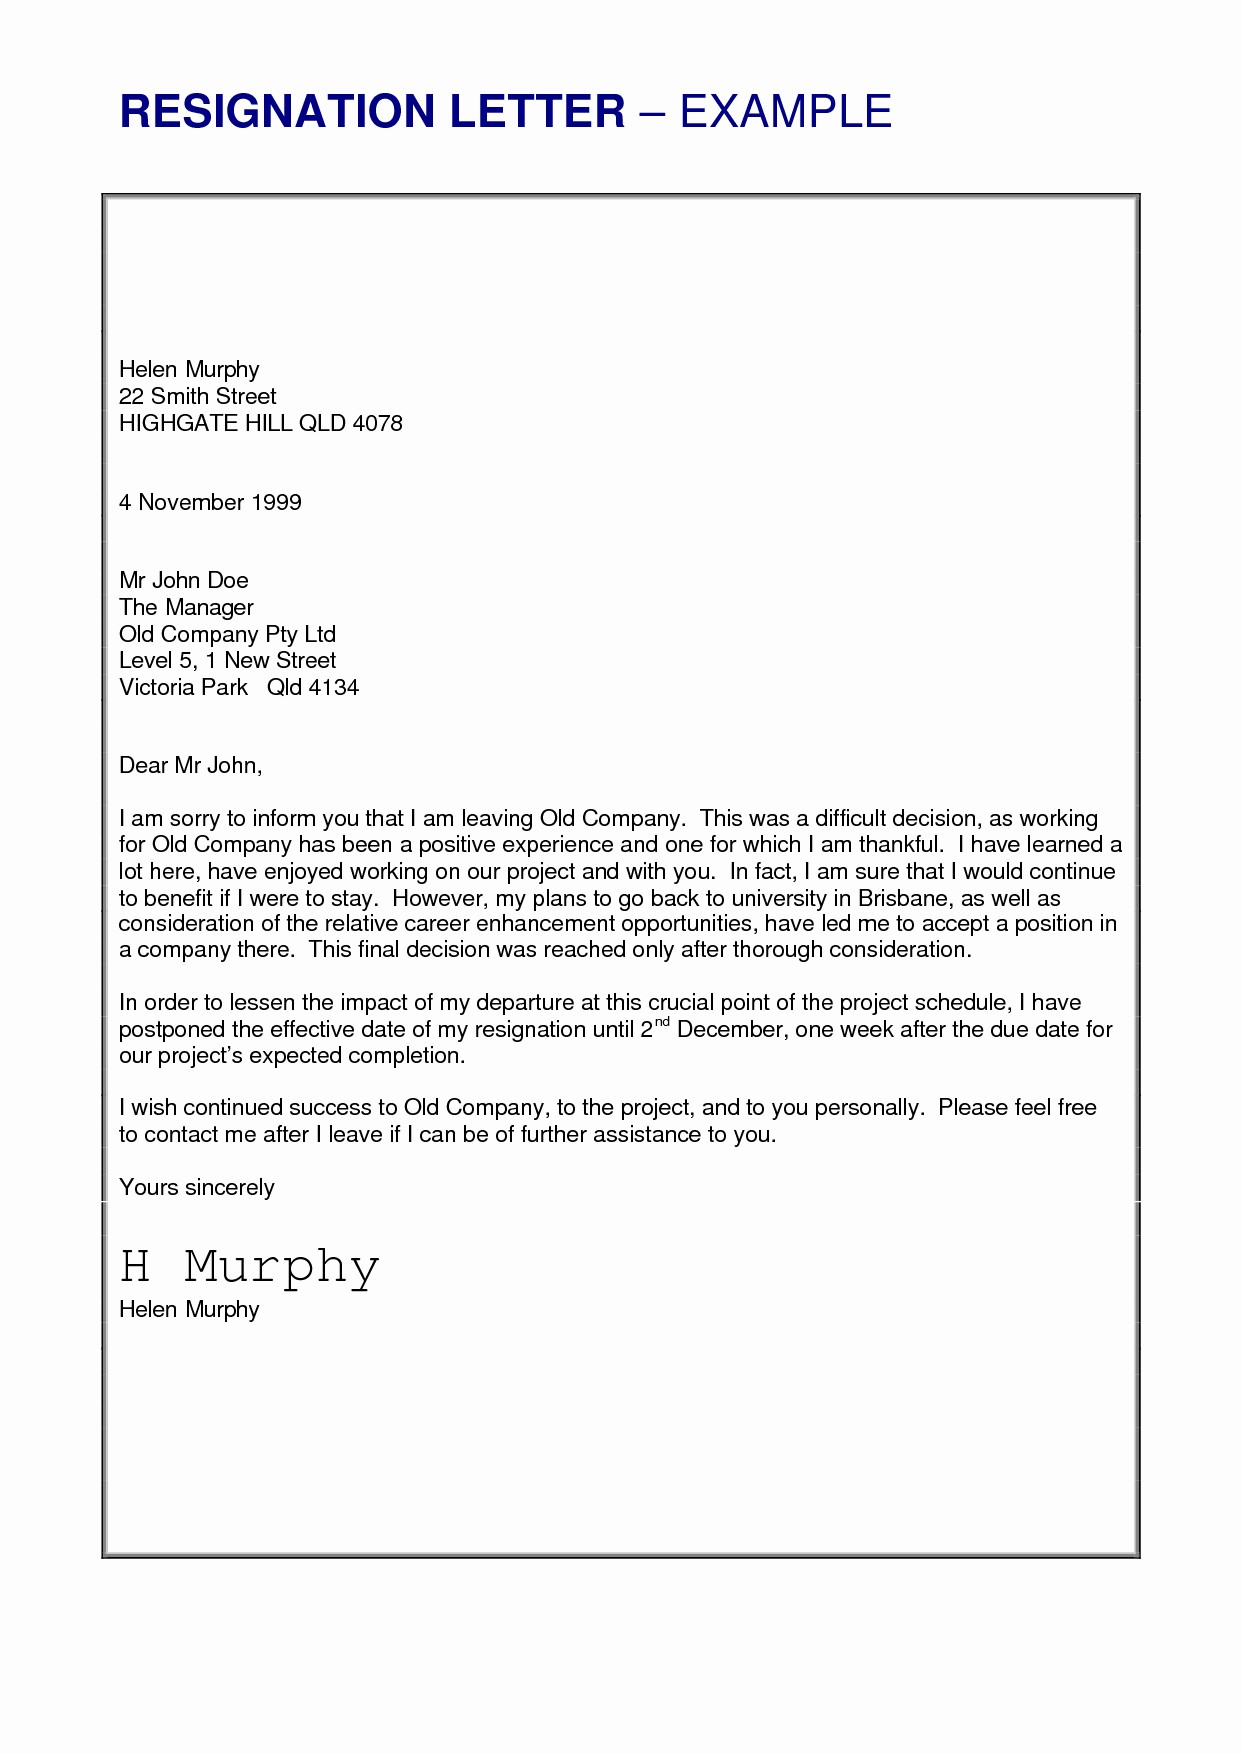 Letter Of Resignation Template Microsoft Beautiful Free Resignation Letter Template Microsoft Word Download